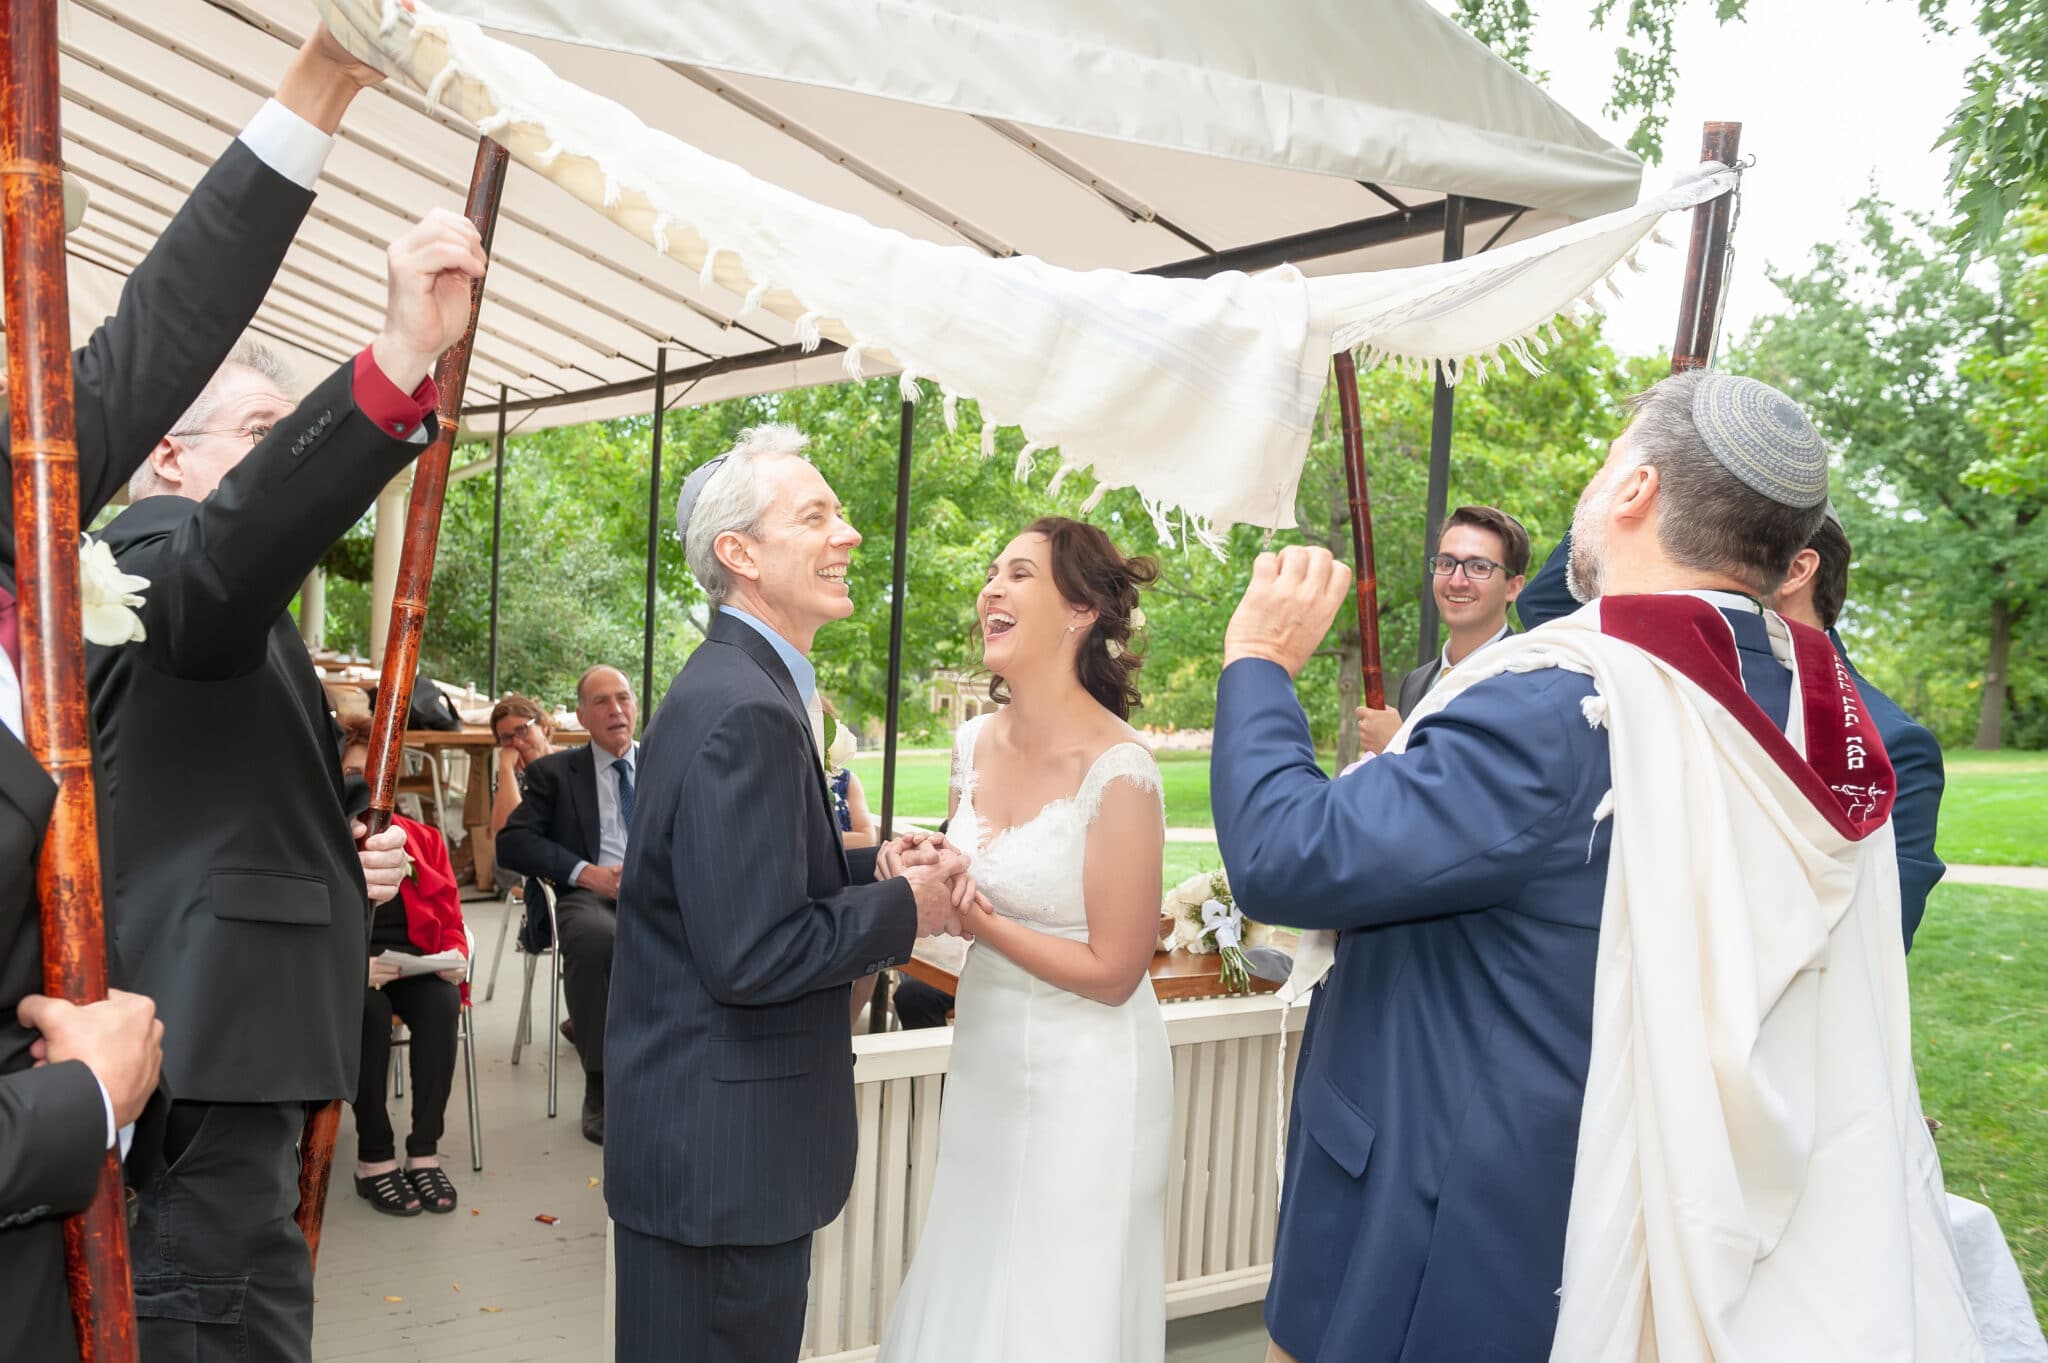 An older bride and groom hold hands under the chuppah at a Jewish wedding ceremony held outdoors at Chautauqua Park in Boulder.